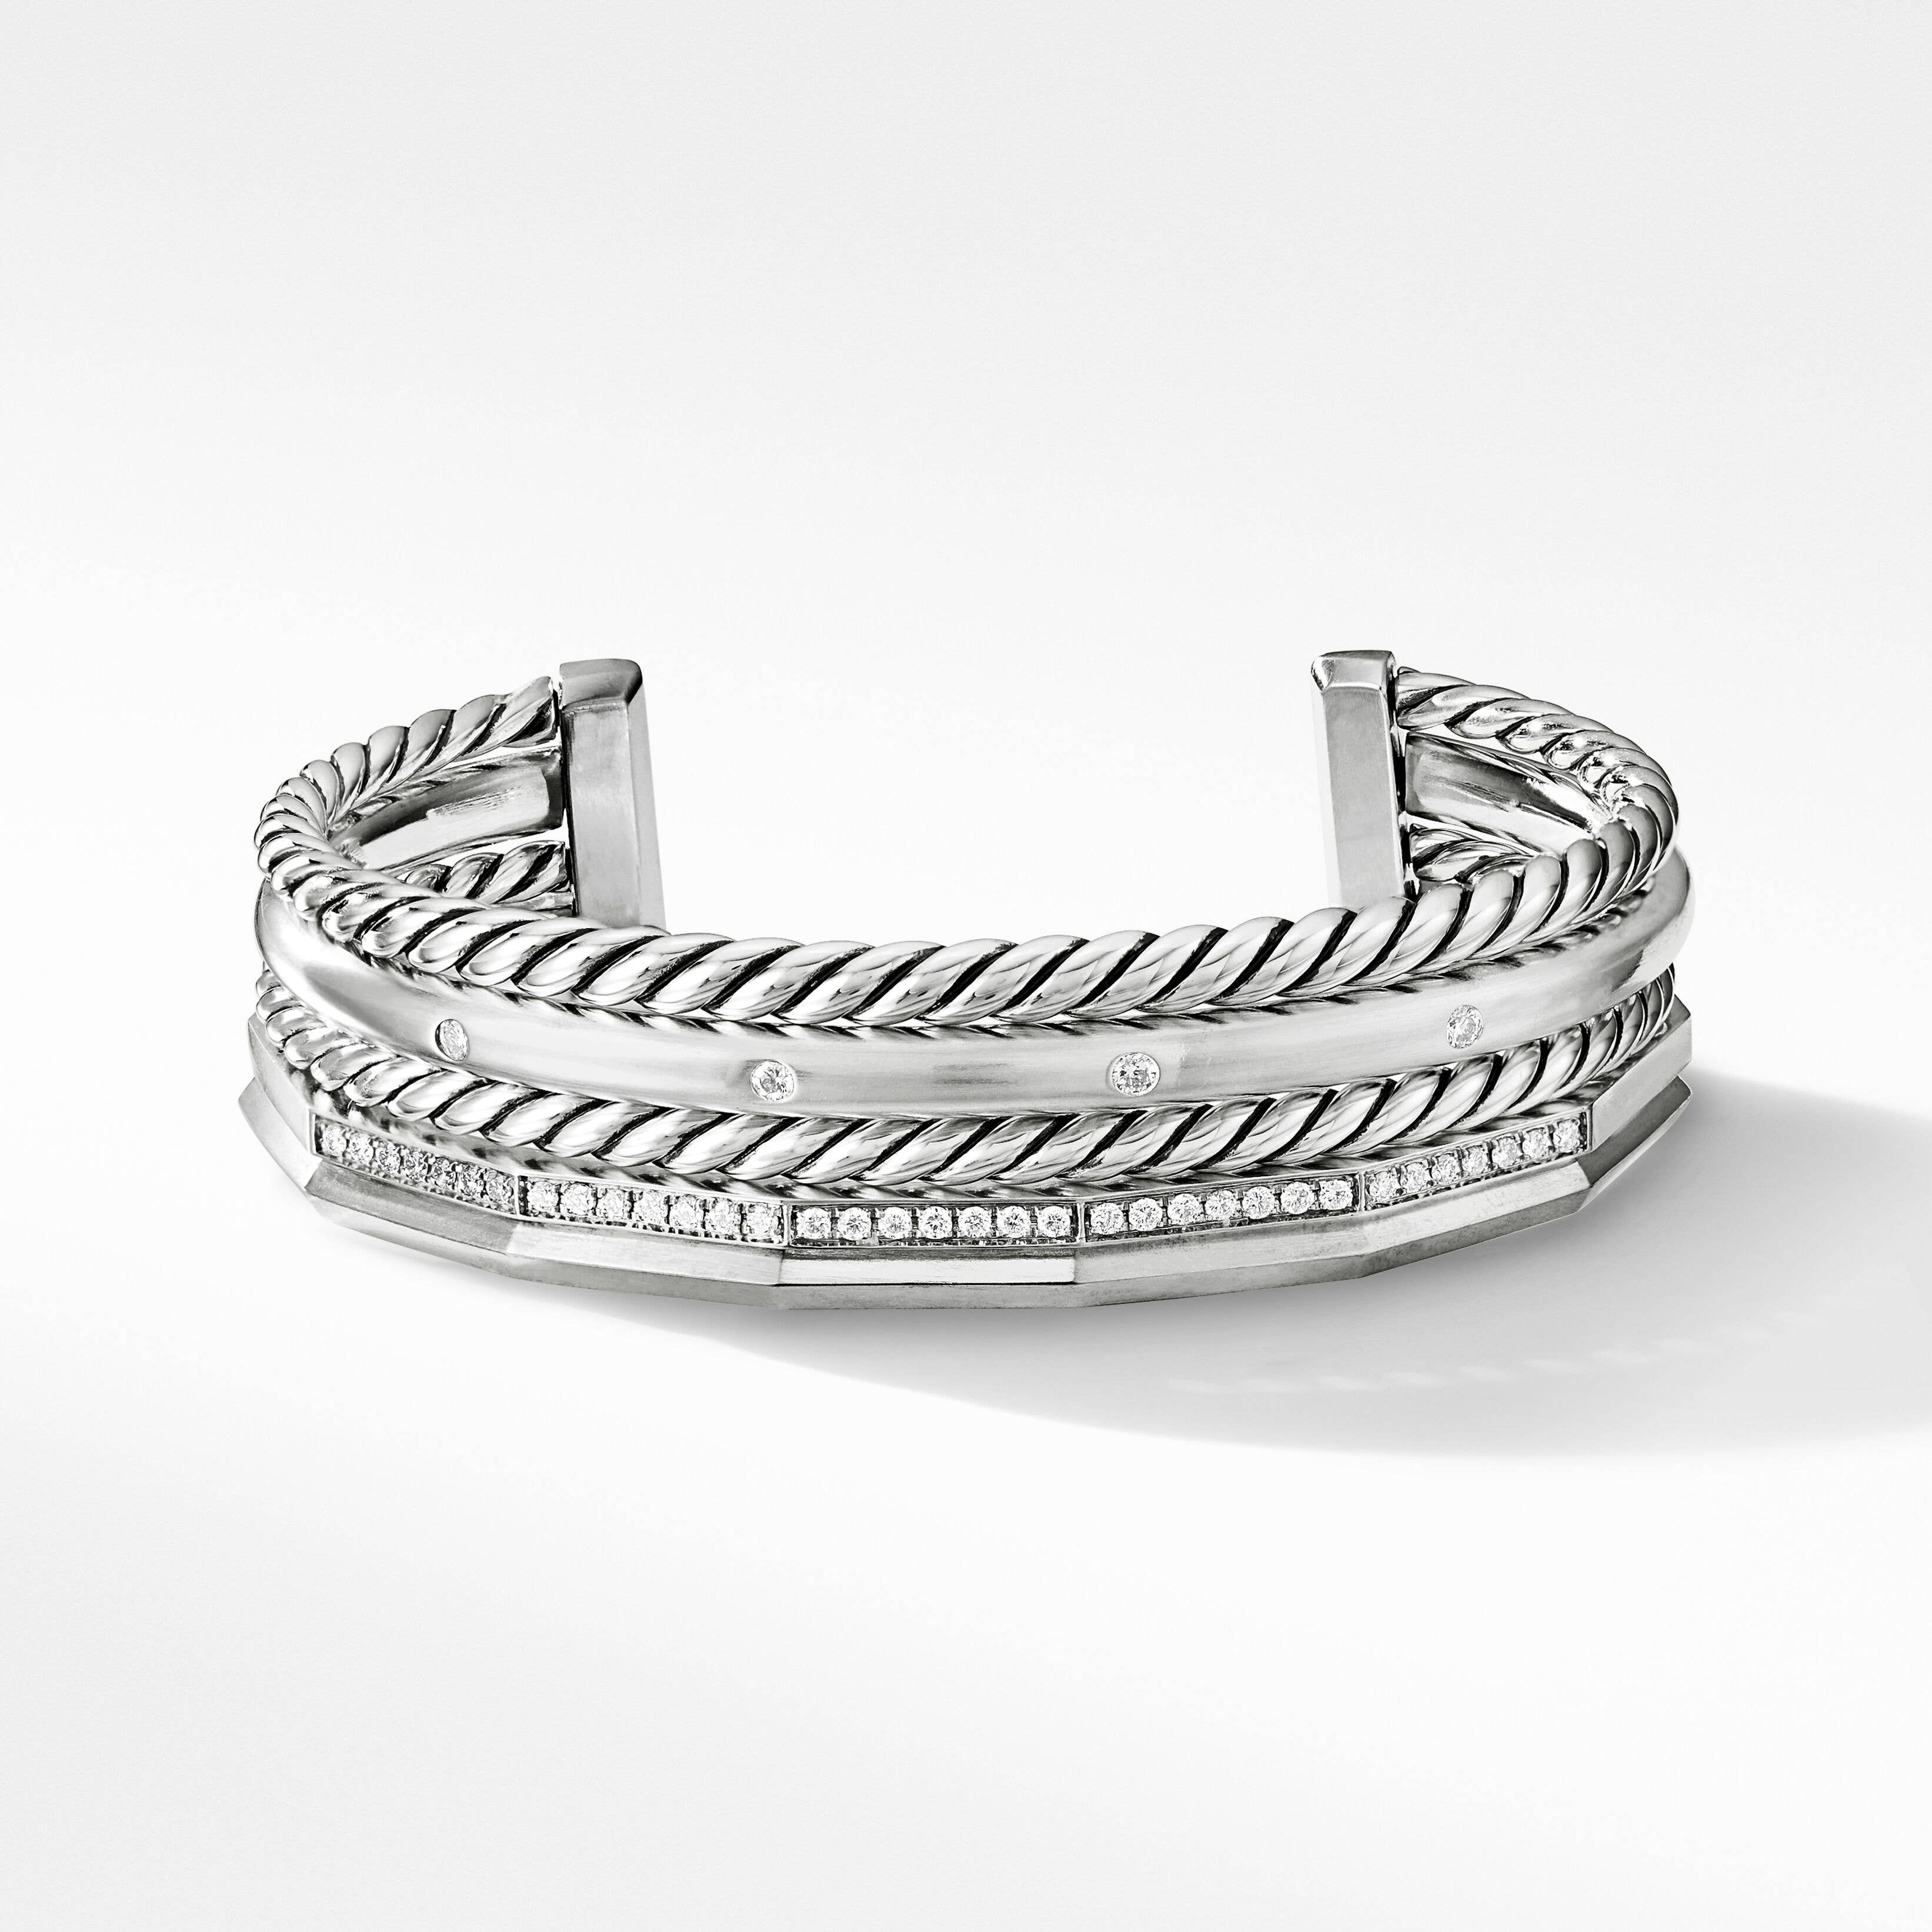 Stax Five Row Cuff Bracelet in Sterling Silver with Diamonds